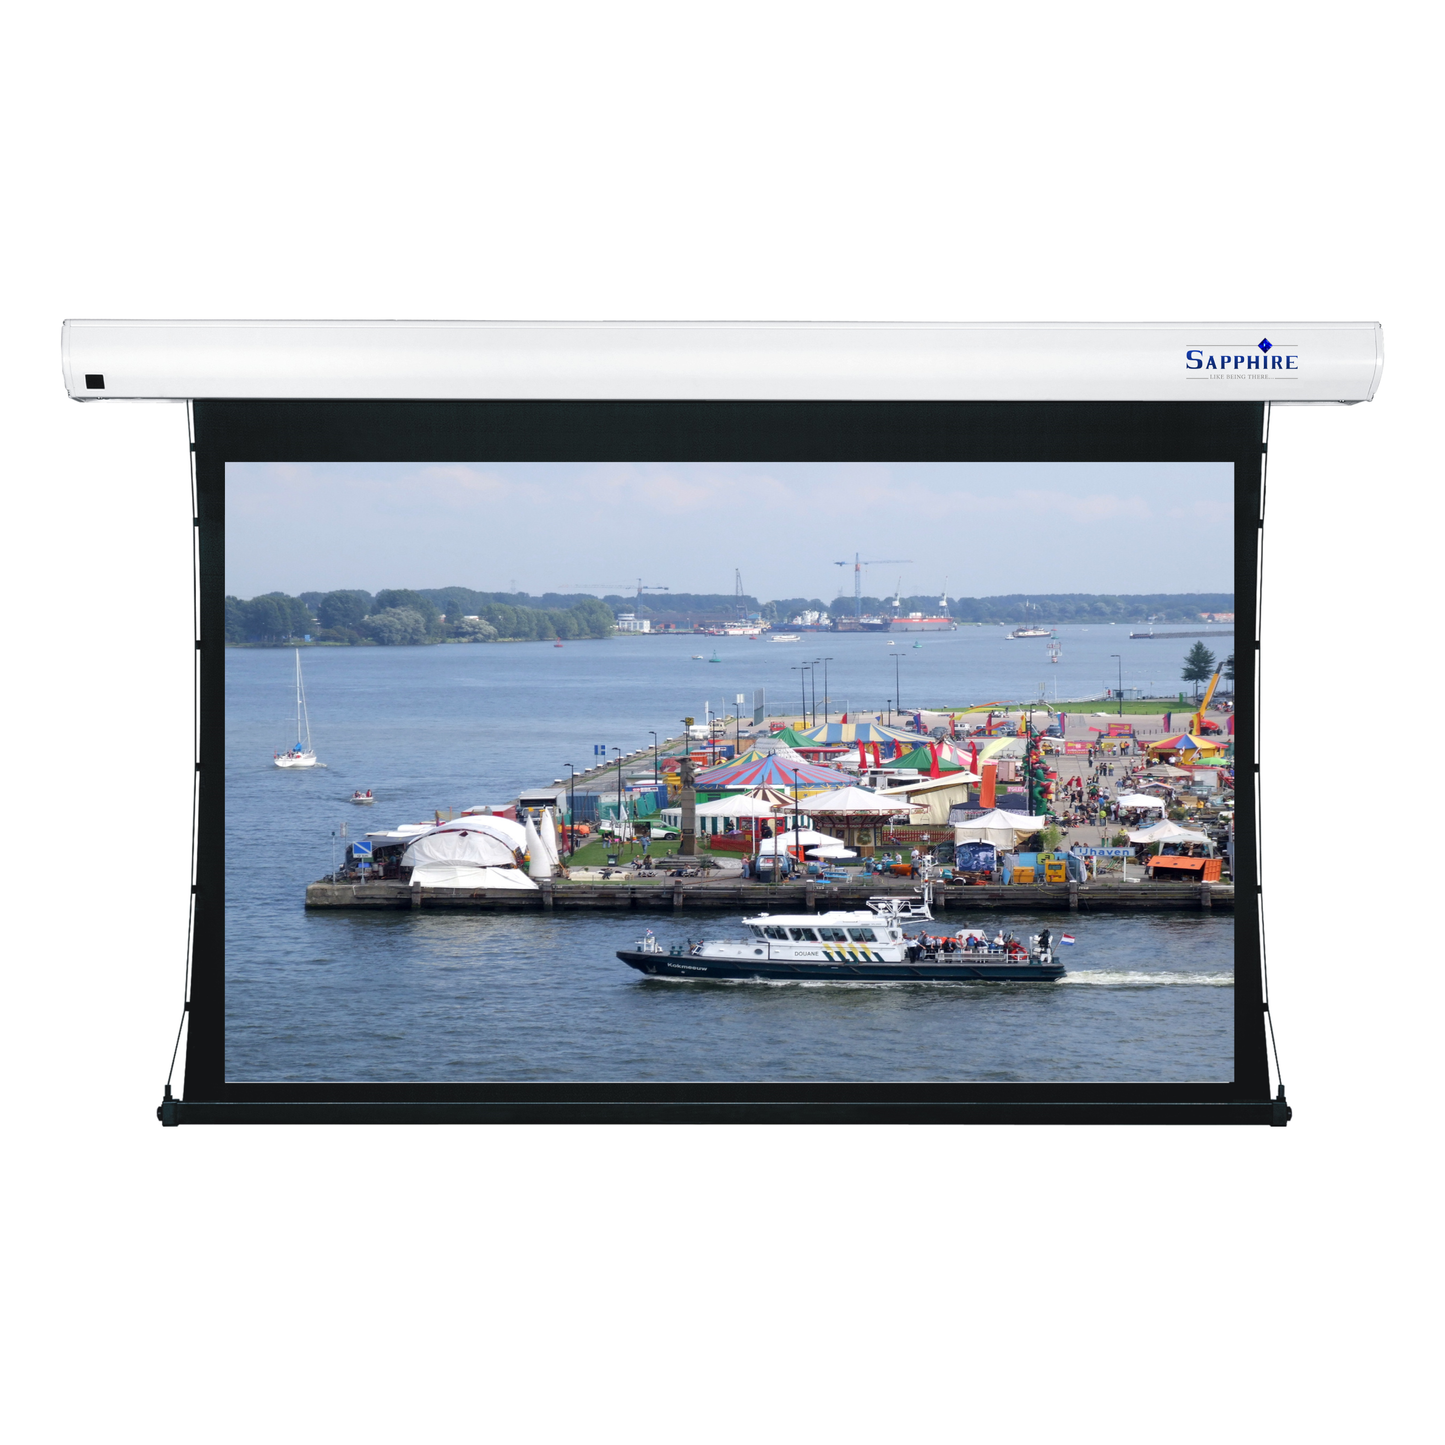 Sapphire Tab Tension Electric Infra Red Screen 16:10 Format Viewing Area 2346mm x 1466mm Approx Case Dimensions L 2834mm x H 134mm x D 135mm